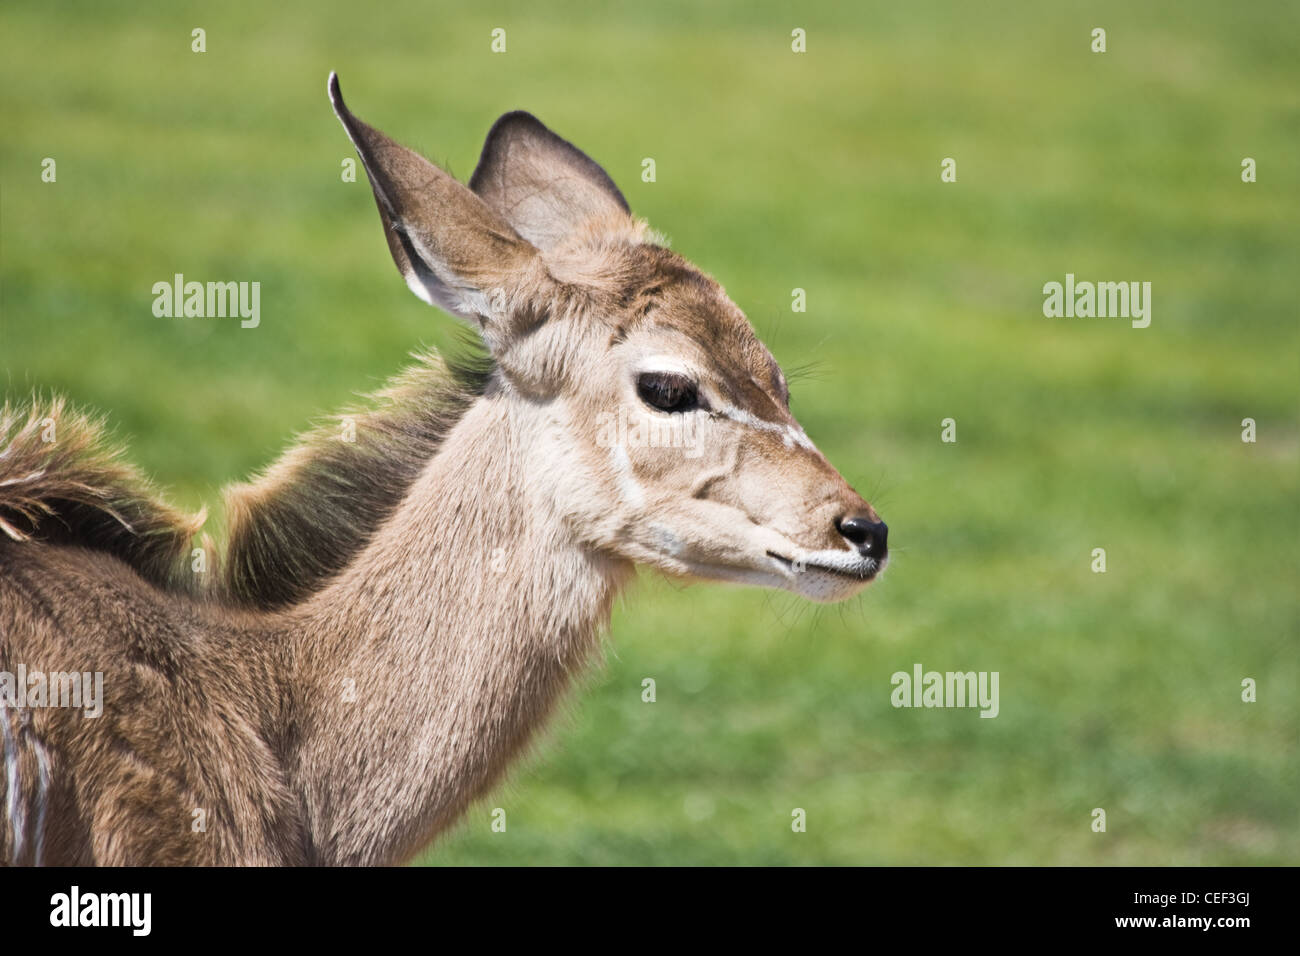 Greater Kudu calf or Tragelaphus strepsiceros  with green grass background Stock Photo